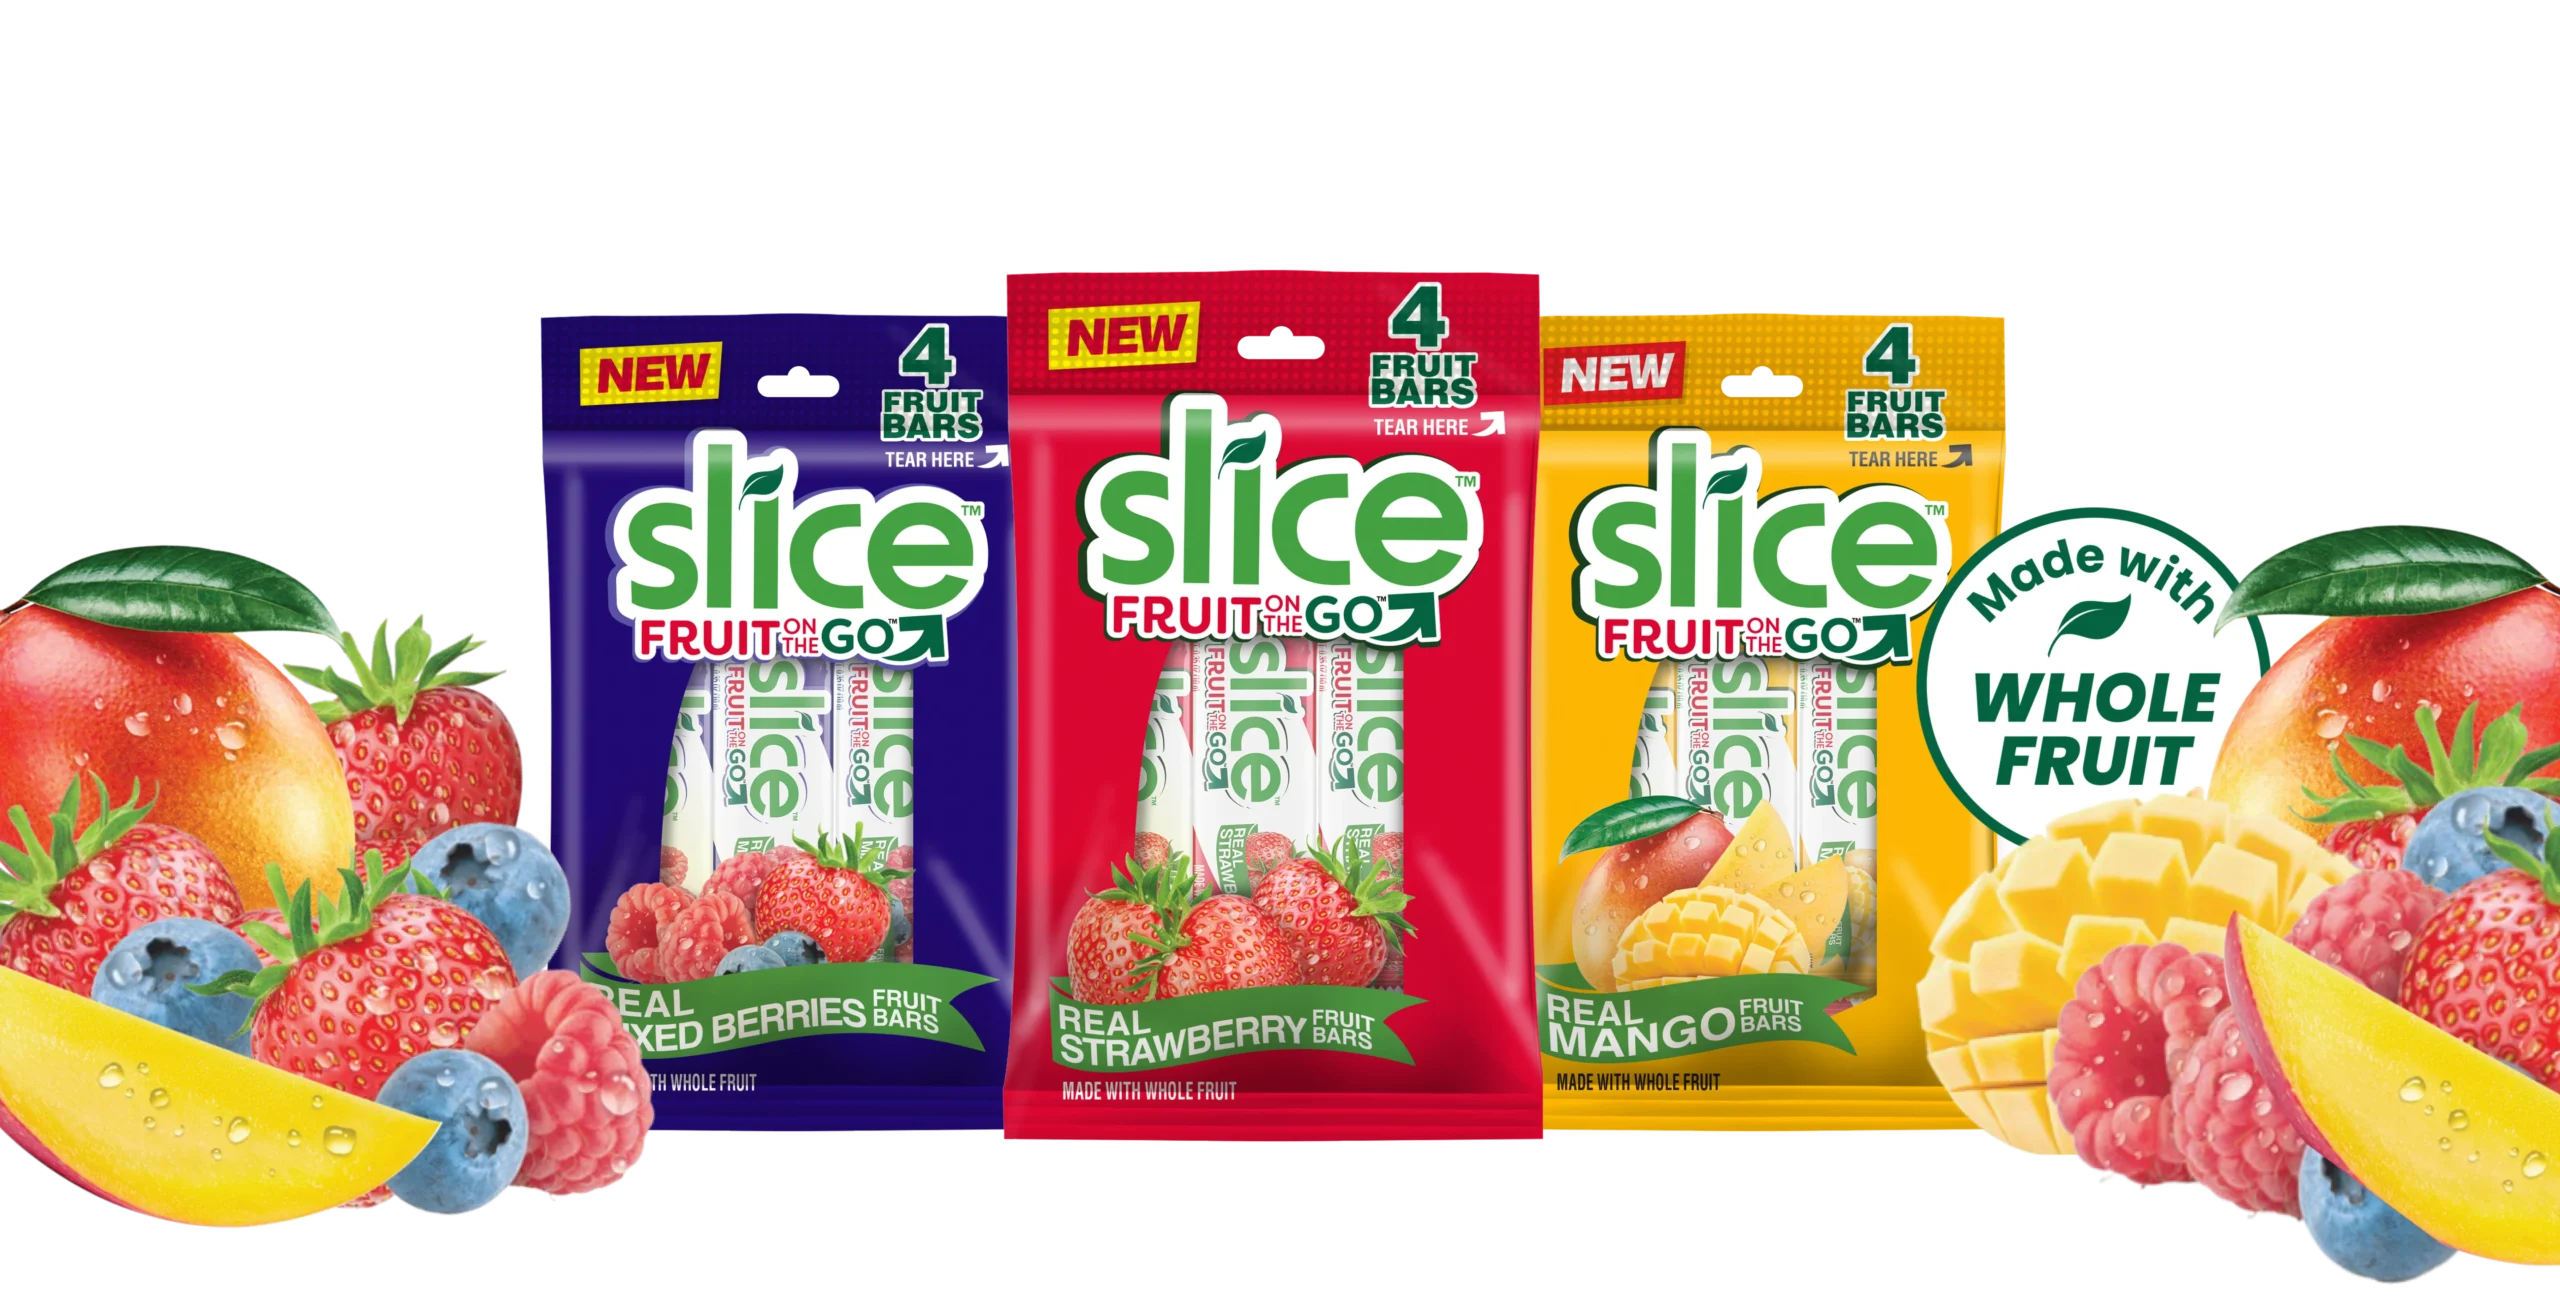 Slice fruit products